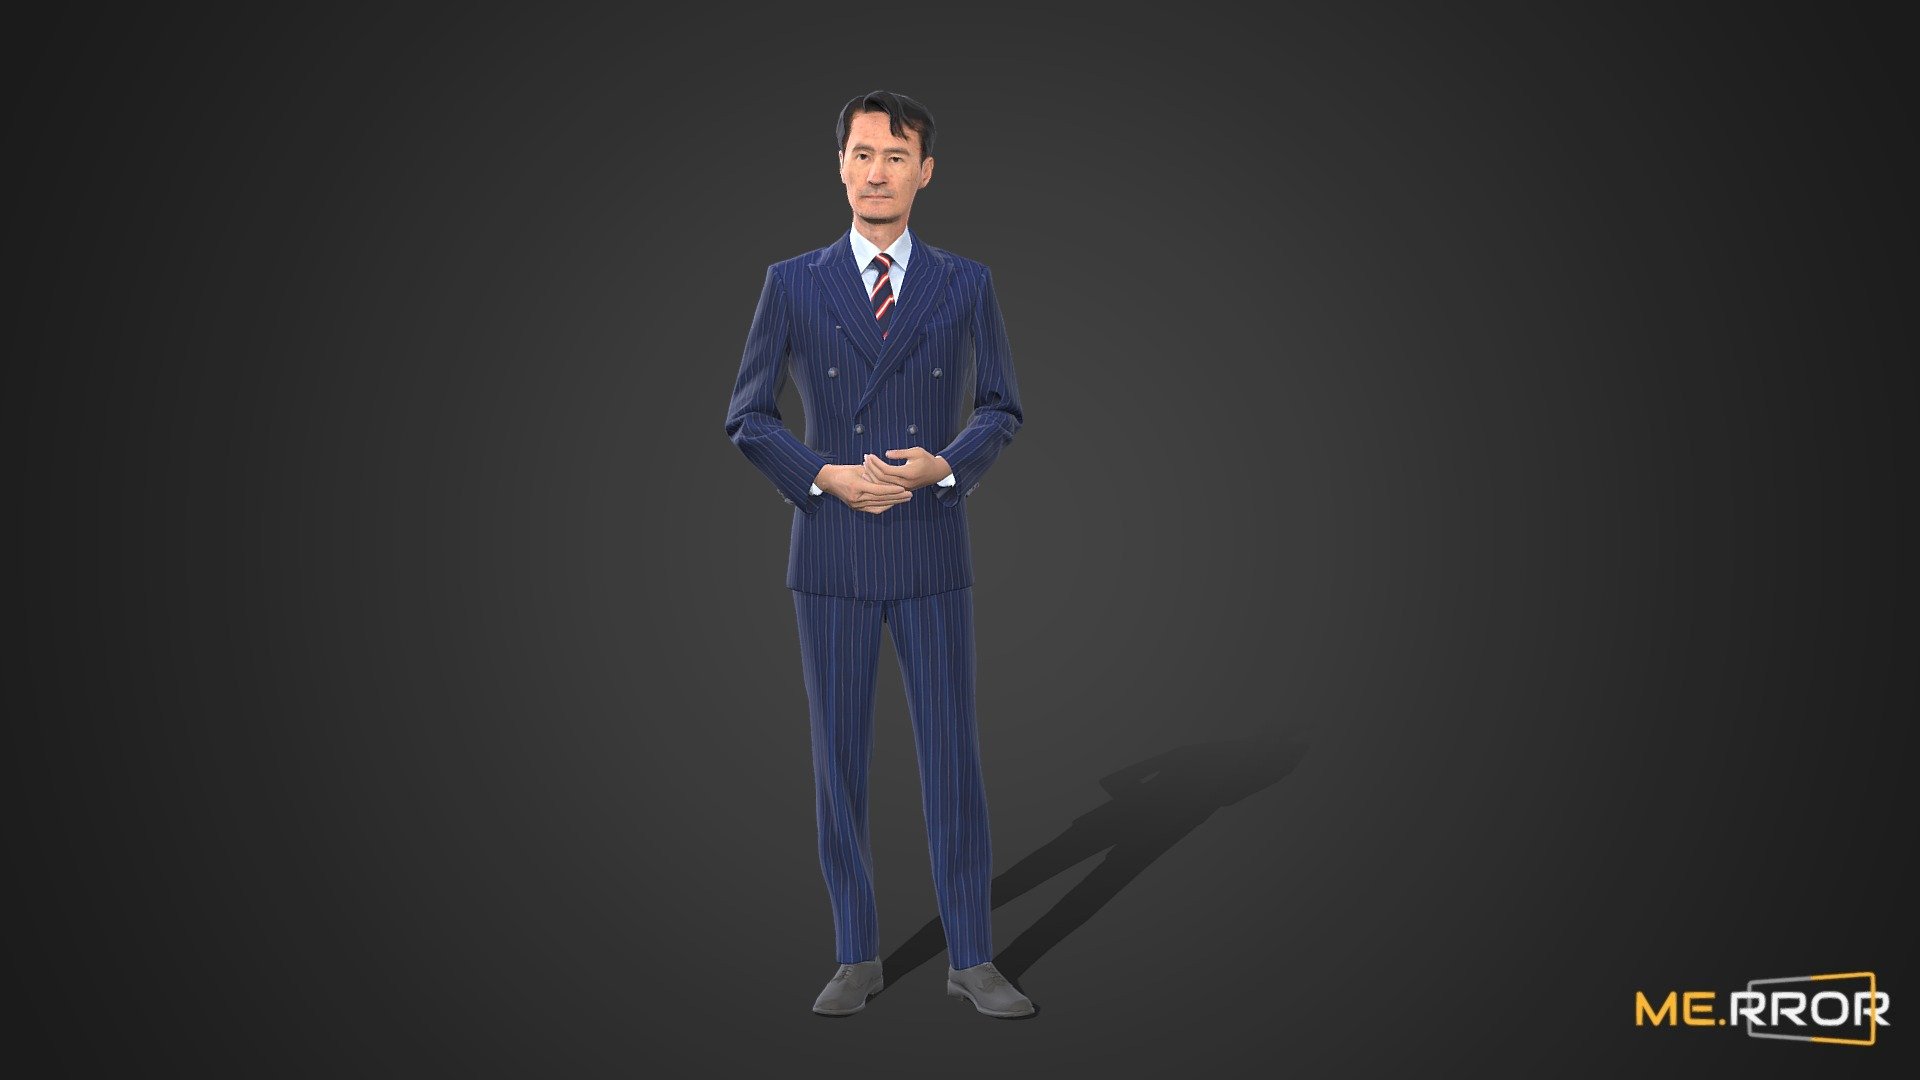 ME.RROR


From 3D models of Asian individuals to a fresh selection of free assets available each month - explore a richer diversity of photorealistic 3D assets at the ME.RROR asset store!

https://me-rror.com/store




[Model Info]




Model Formats : FBX,MAX


Texture Maps (8K) : Diffuse




Find Scanned - 2M poly version here: https://sketchfab.com/3d-models/asian-man-scan-posed-12-2m-poly-6a2c51b74ec941b8b85c3f7497c0816d



Find Scanned - TPO version here: https://sketchfab.com/3d-models/game-ready-asian-man-scan-posed-12-01ebb1b6cbdf4f15b473bf7116fcd4d5

If you encounter any problems using this model, please feel free to contact us. We'd be glad to help you.



[About ME.RROR]

Step into the future with ME.RROR, South Korea's leading 3D specialist. Bespoke creations are not just possible; they are our specialty.

Service areas:




3D scanning

3D modeling

Virtual human creation

Inquiries: https://merror.channel.io/lounge - Asian Man Scan_Posed 12 30K poly - 3D model by ME.RROR Studio (@merror) 3d model